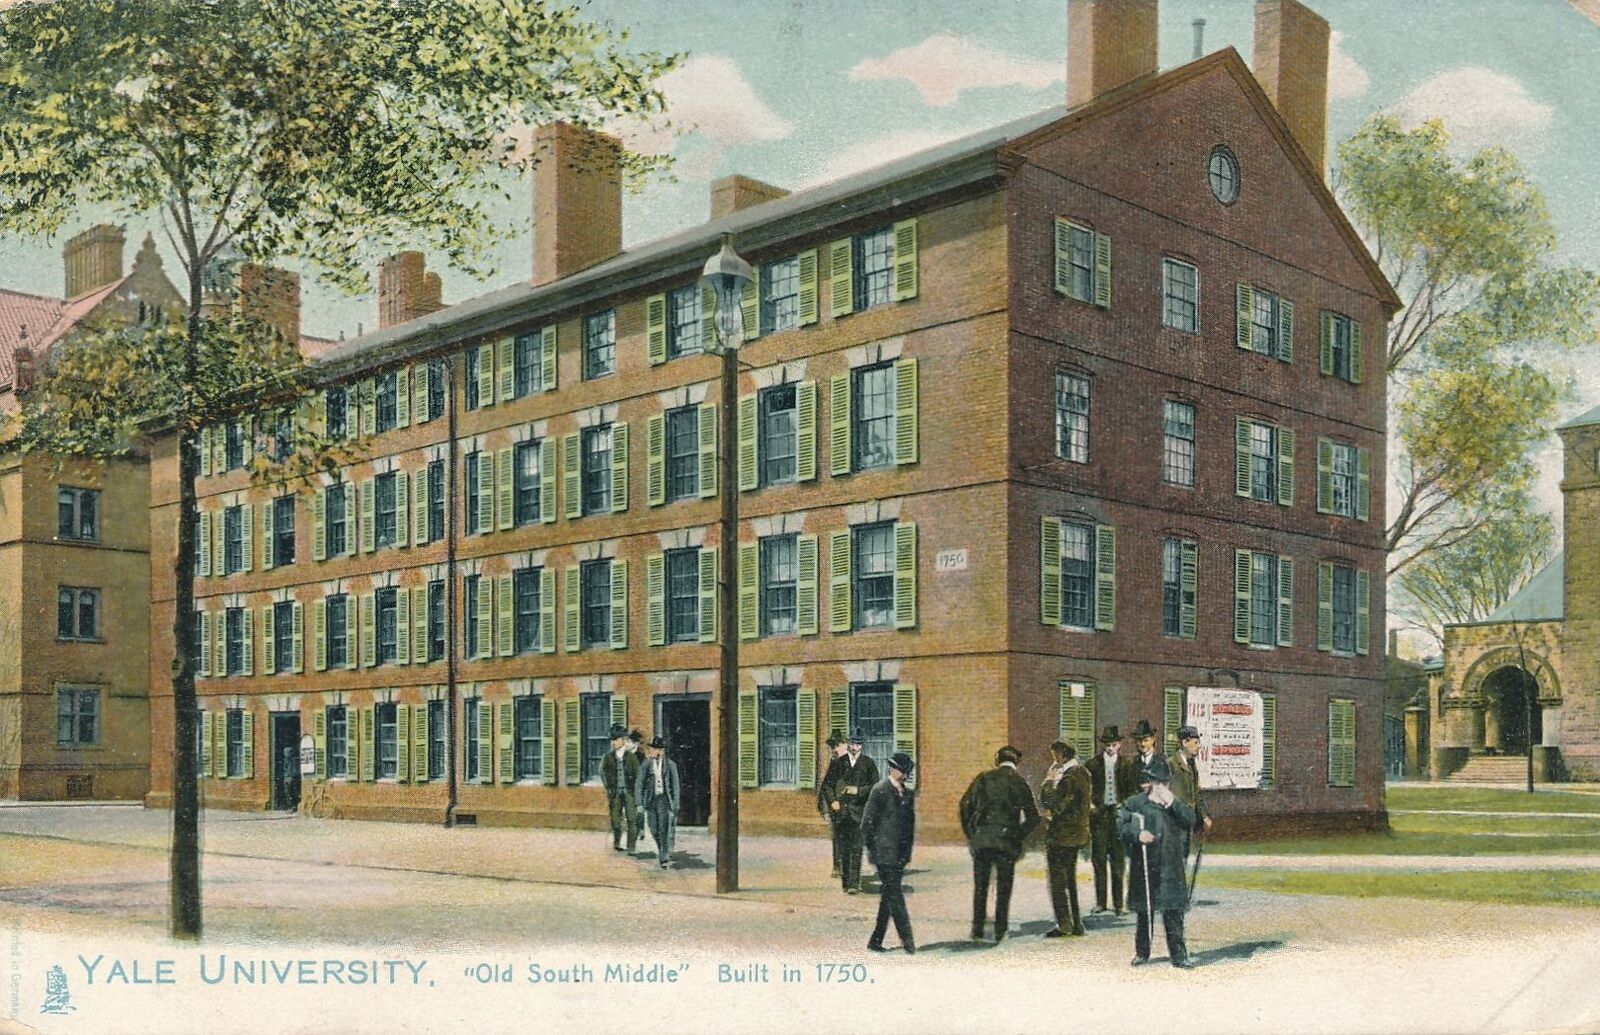 NEW HAVEN CT - Yale University Old South Middle (Built 1750) Postcard - udb